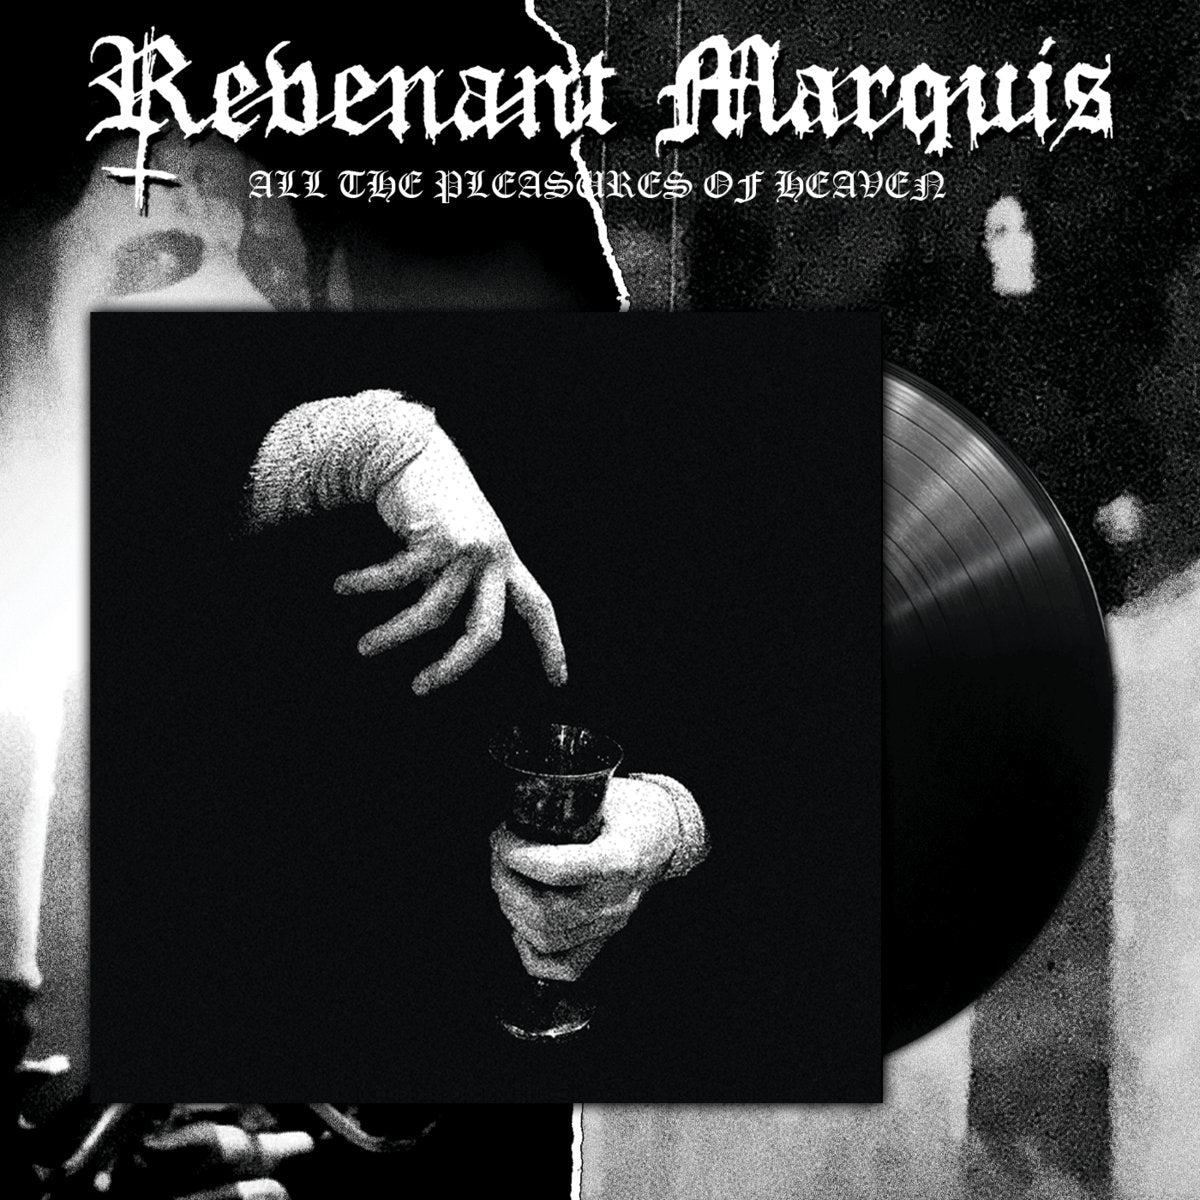 [SOLD OUT] REVENANT MARQUIS "All the Pleasures of Heaven" Vinyl LP (lim.220 w/insert)